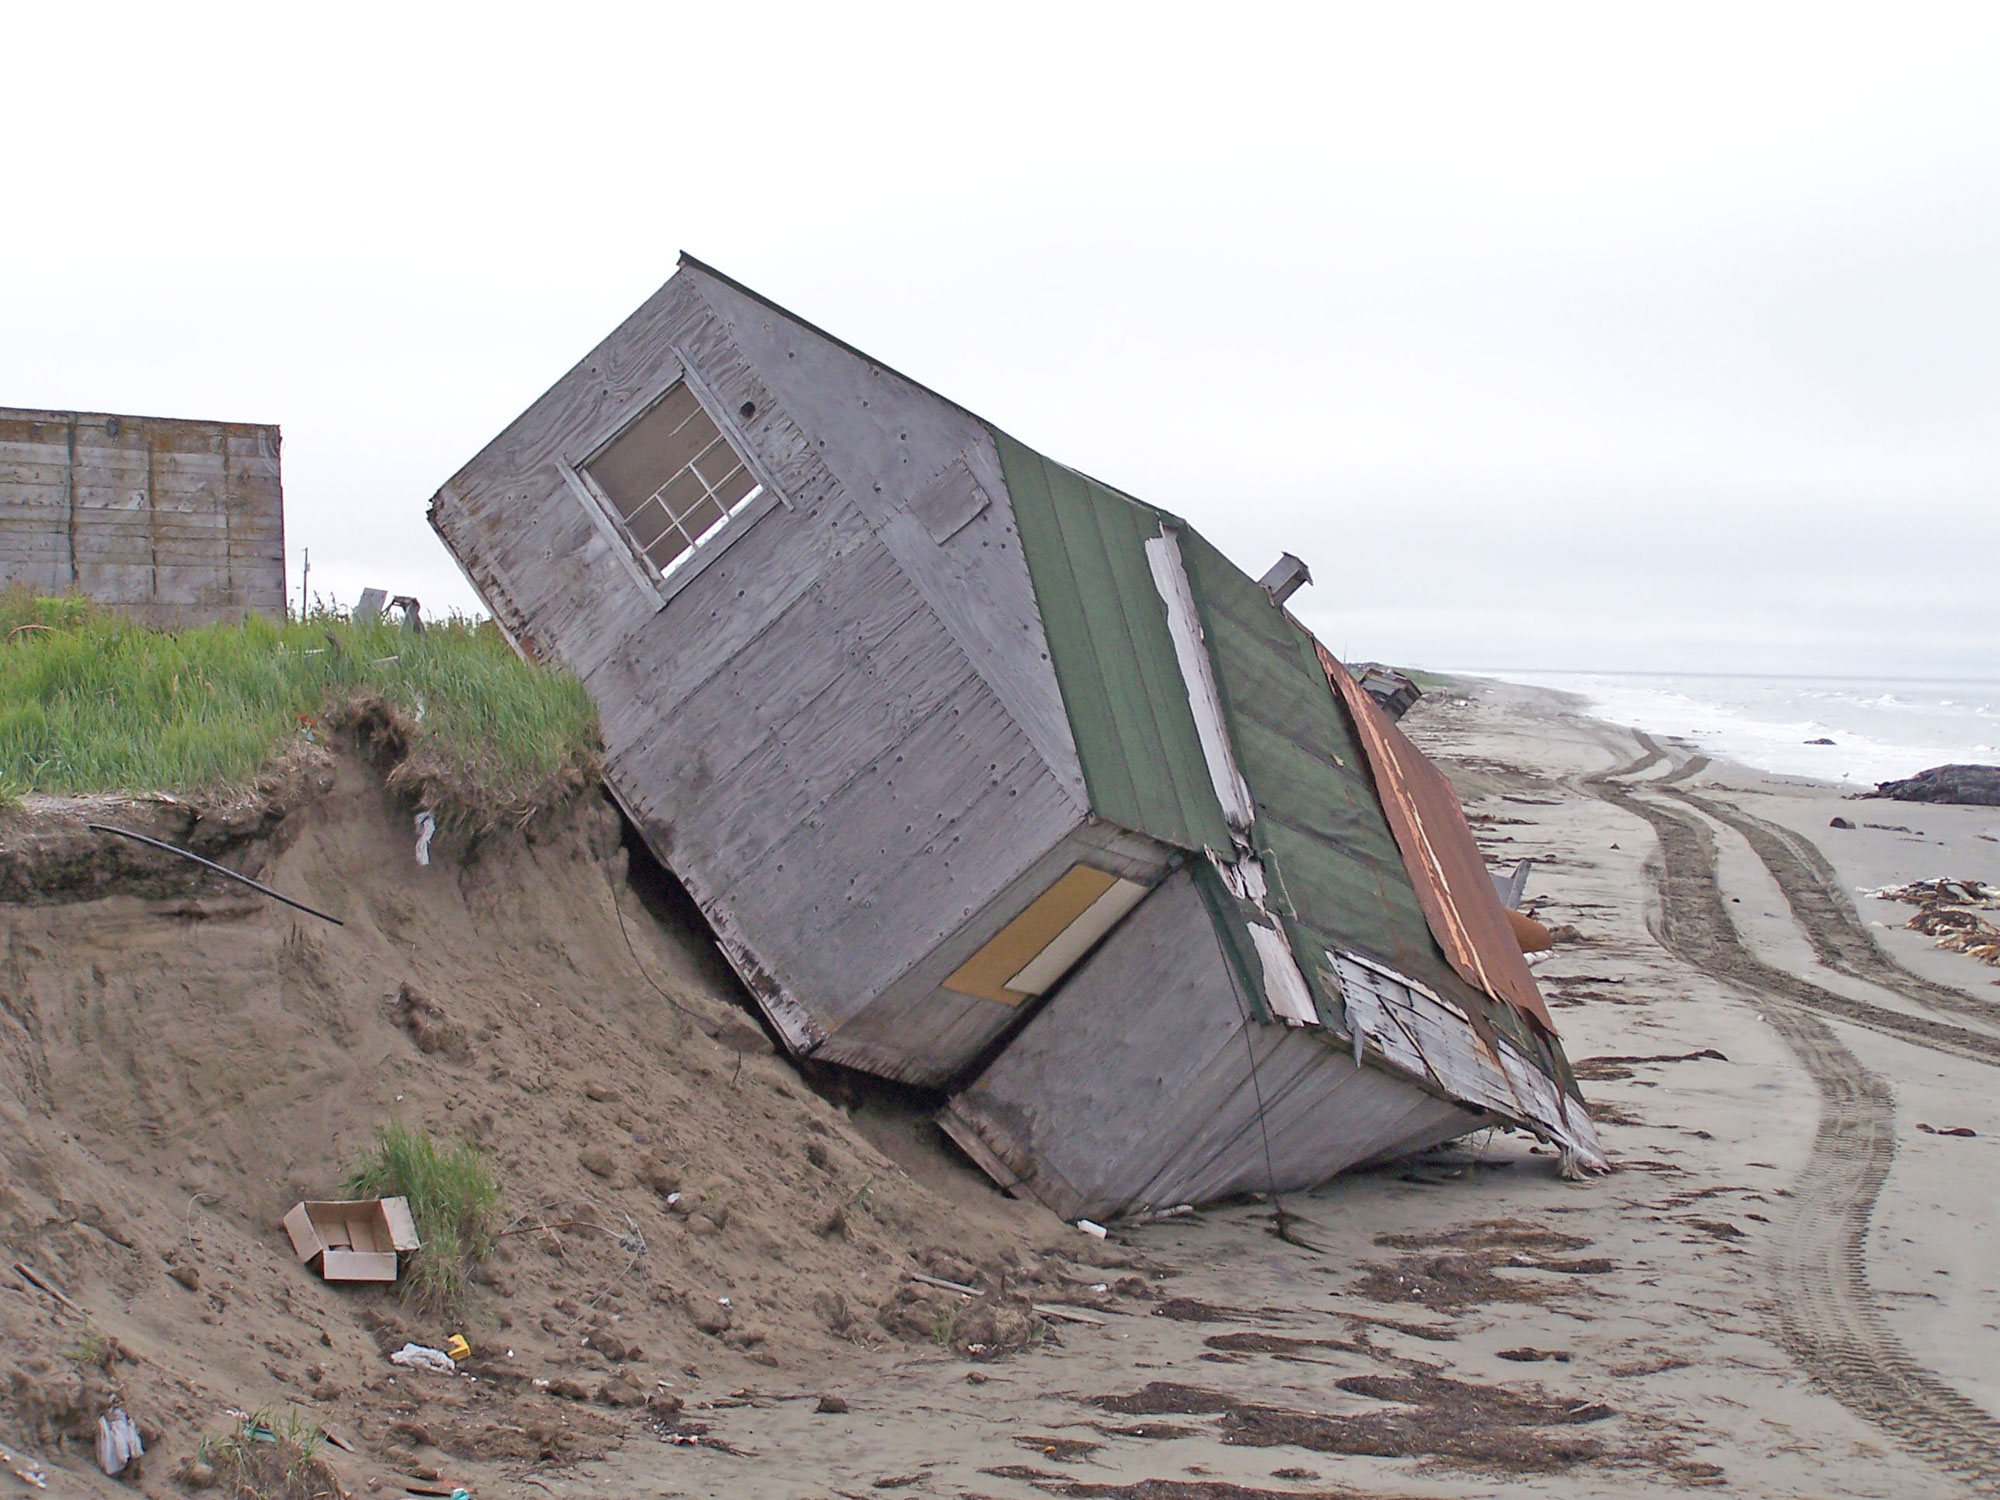 Photograph of a home that has been undermined due to coastal erosion on the Seward Peninsula in Alaska. The photo shows a home sided with unpainted wood, that is tilted over the edge of a sandy coast bluff. One edge of the home is on resting on the beach, while the upper edge is lifted off the ground. 